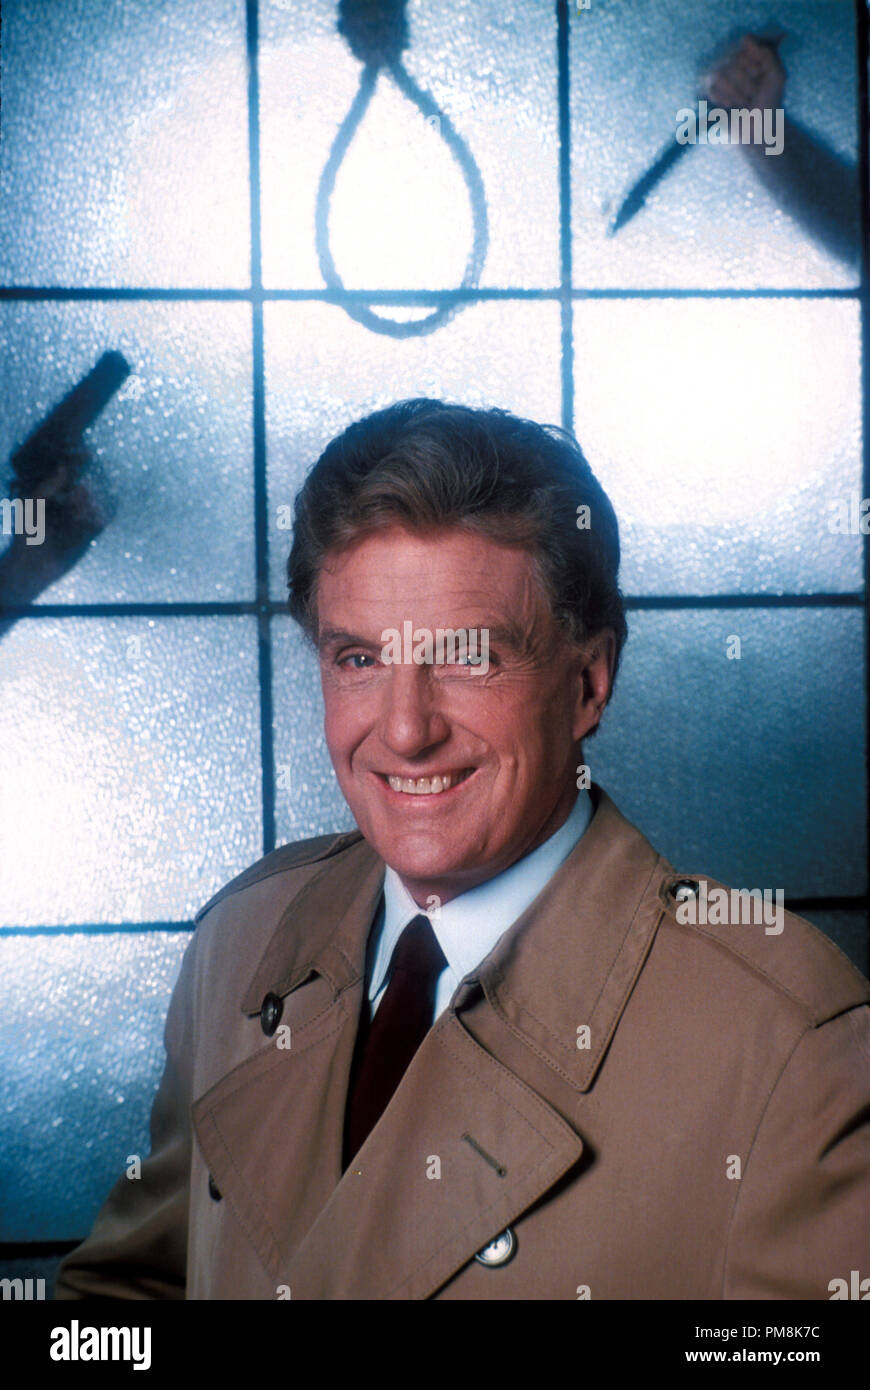 Film still or Publicity still from 'Unsolved Mysteries' Robert Stack, 1989  All Rights Reserved   File Reference # 31623023THA  For Editorial Use Only Stock Photo